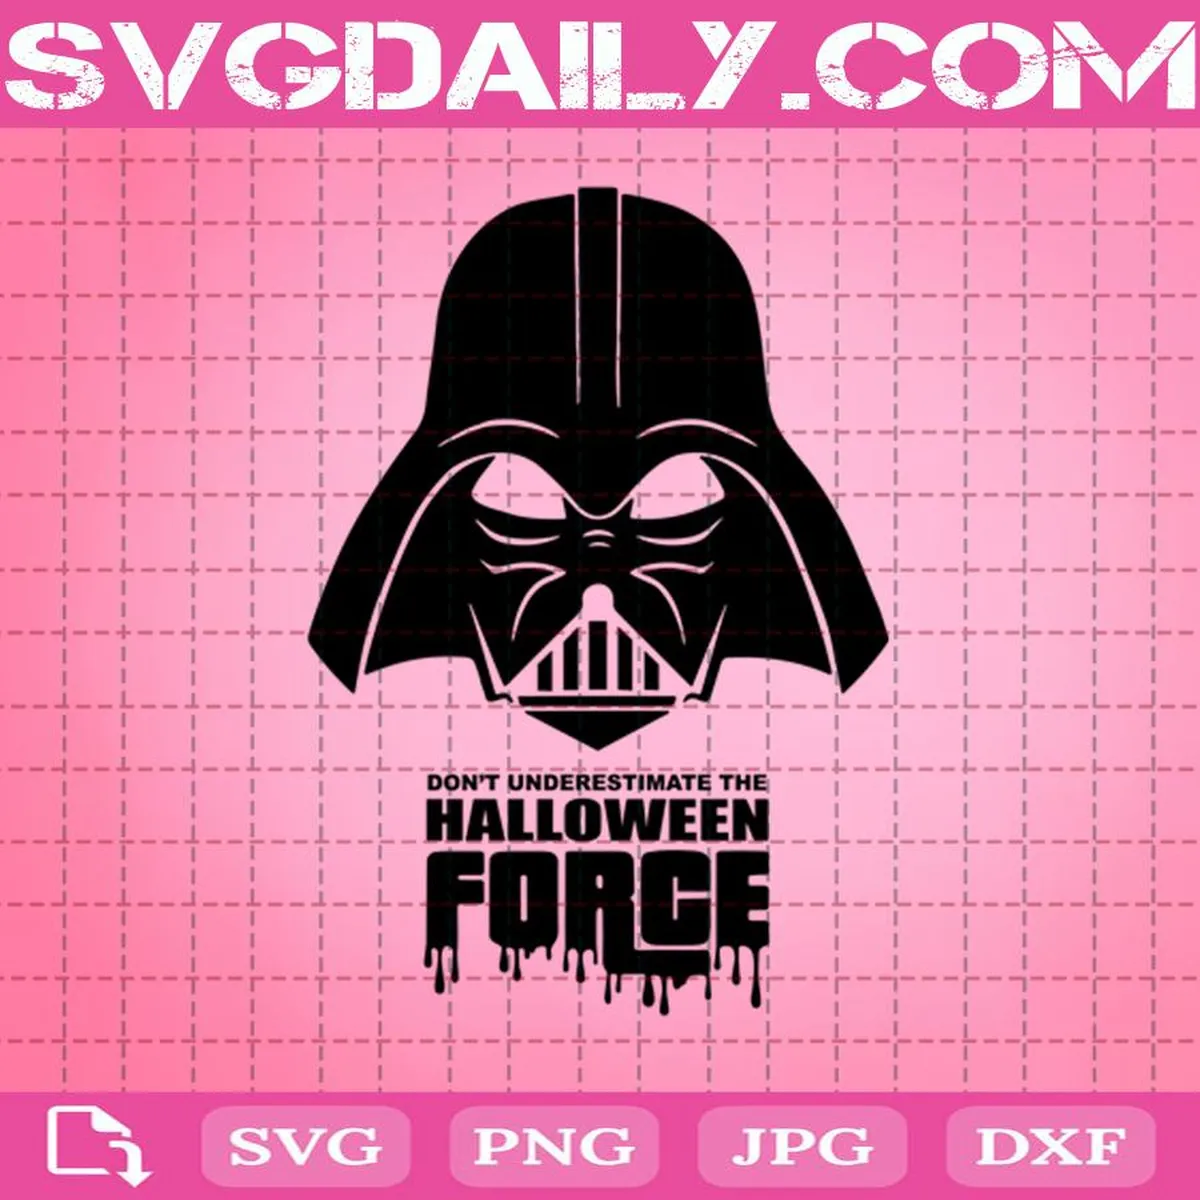 Don’t Underestimate The Halloween Force Svg, Star Wars Svg, Halloween Force Svg, Halloween Svg Png Dxf Eps